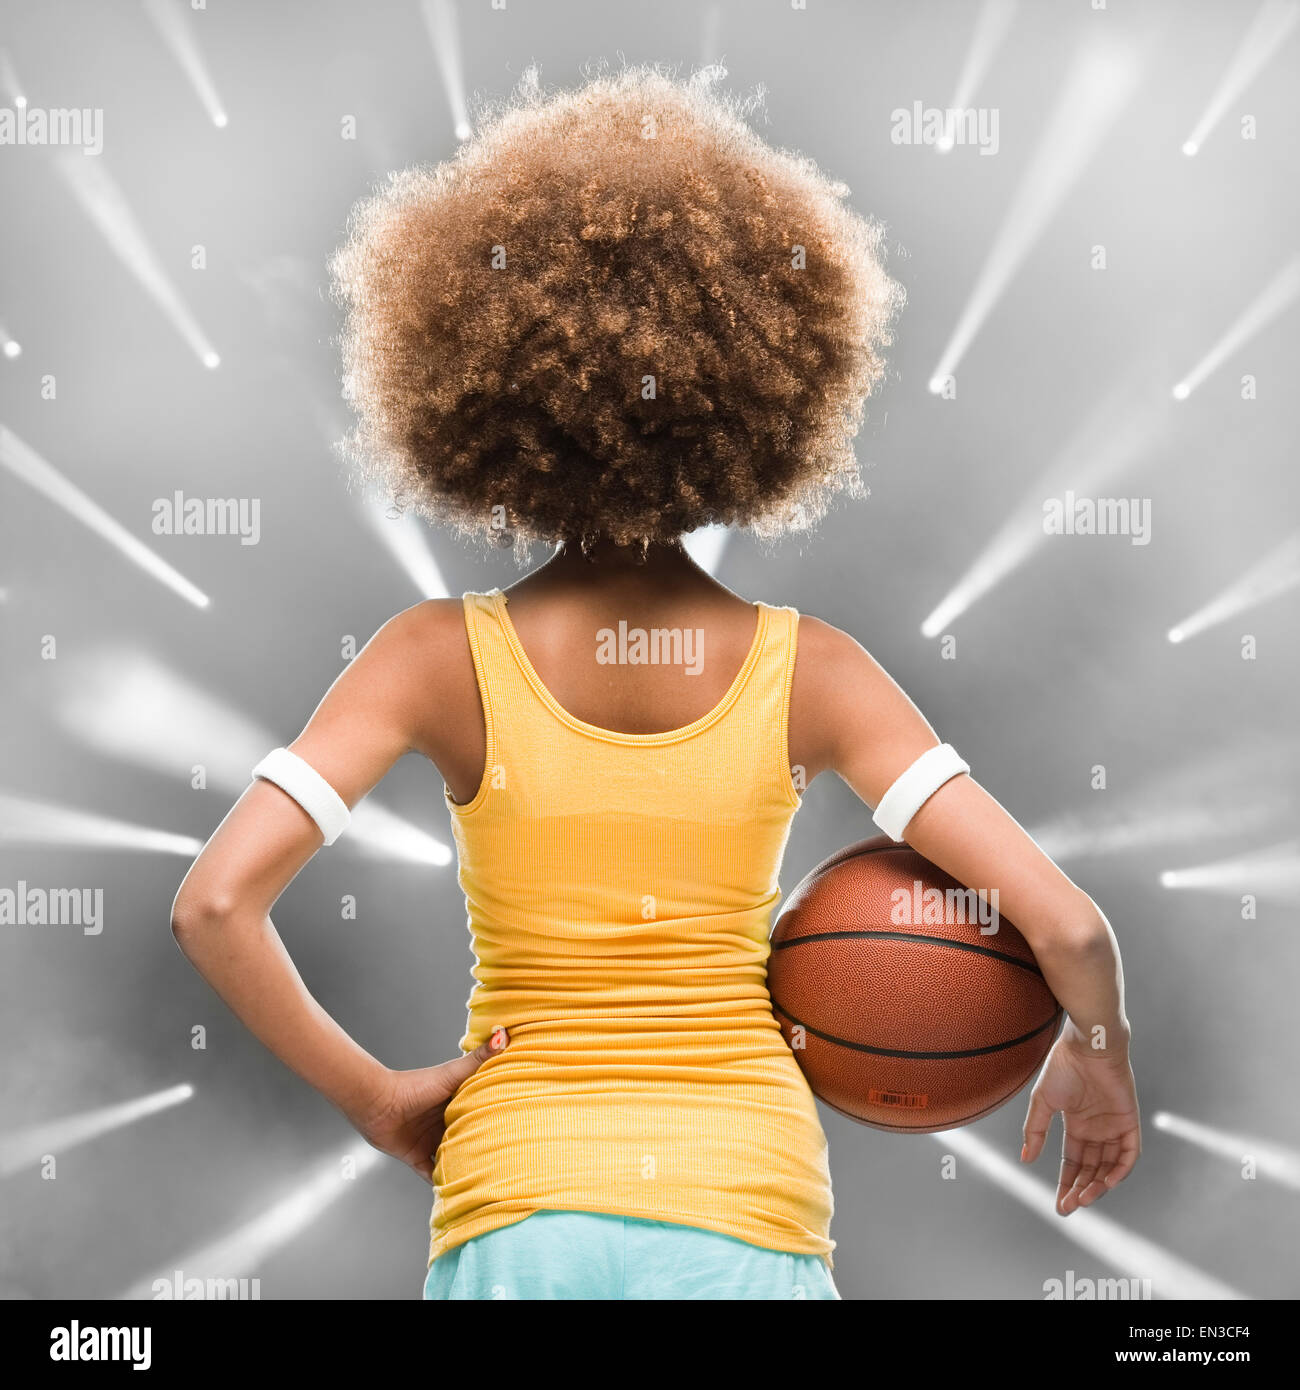 female basketball player with an afro Stock Photo